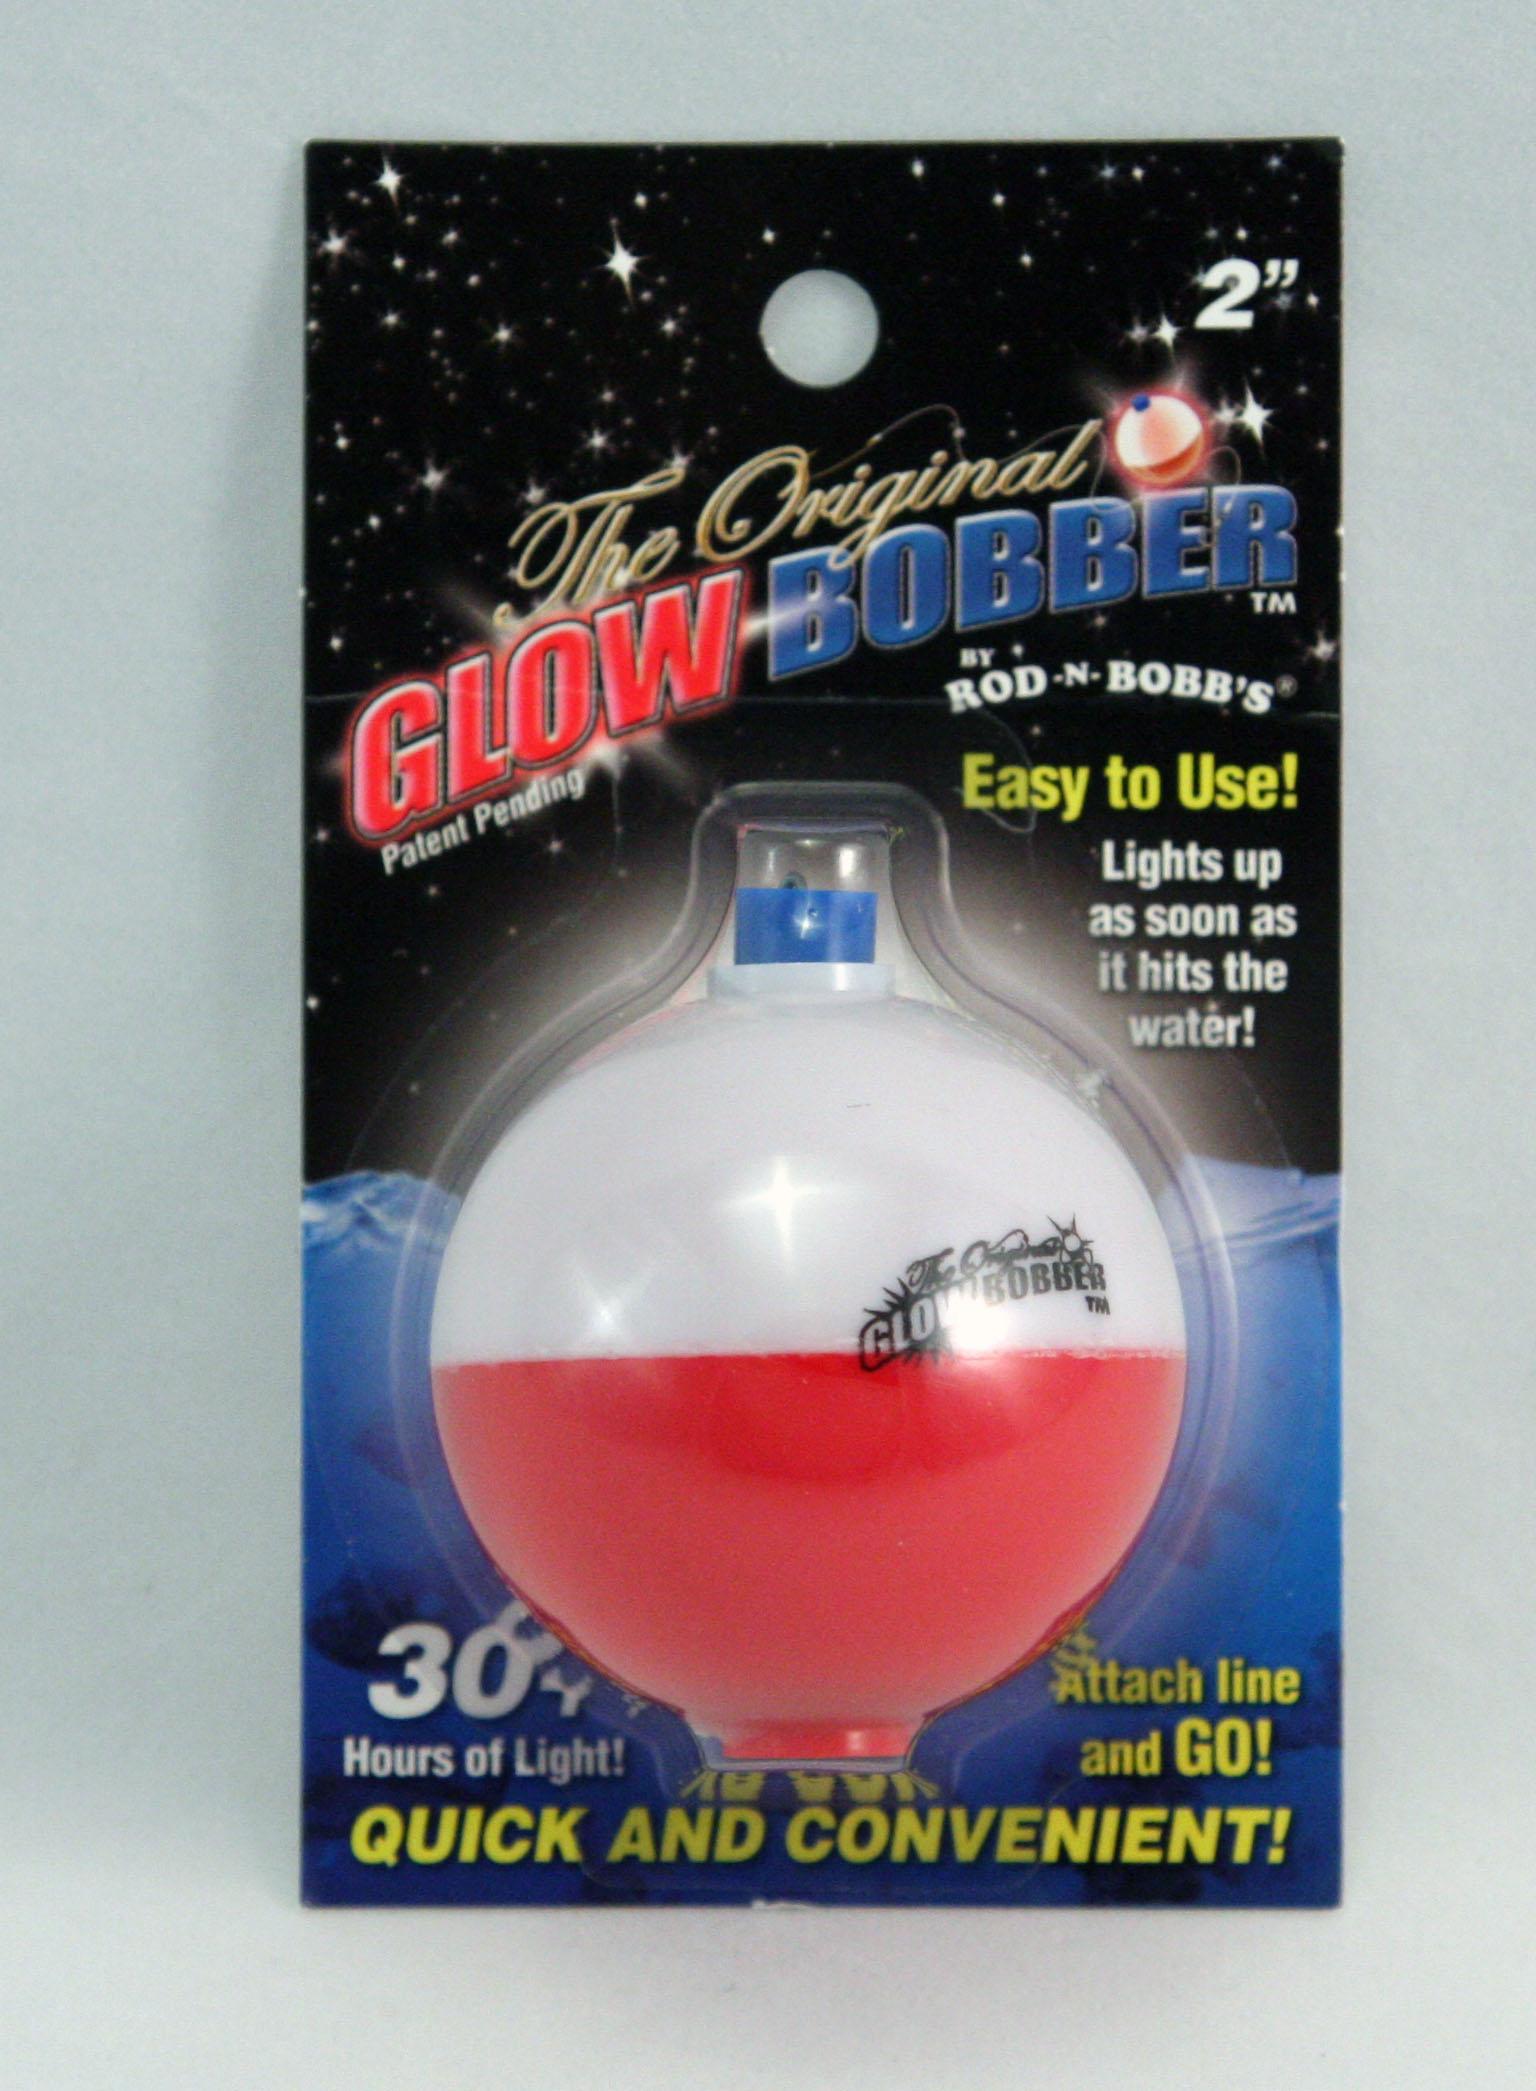 Rod-N-Bobb's Original Glow Bobber, A New Light on an Old Tradition